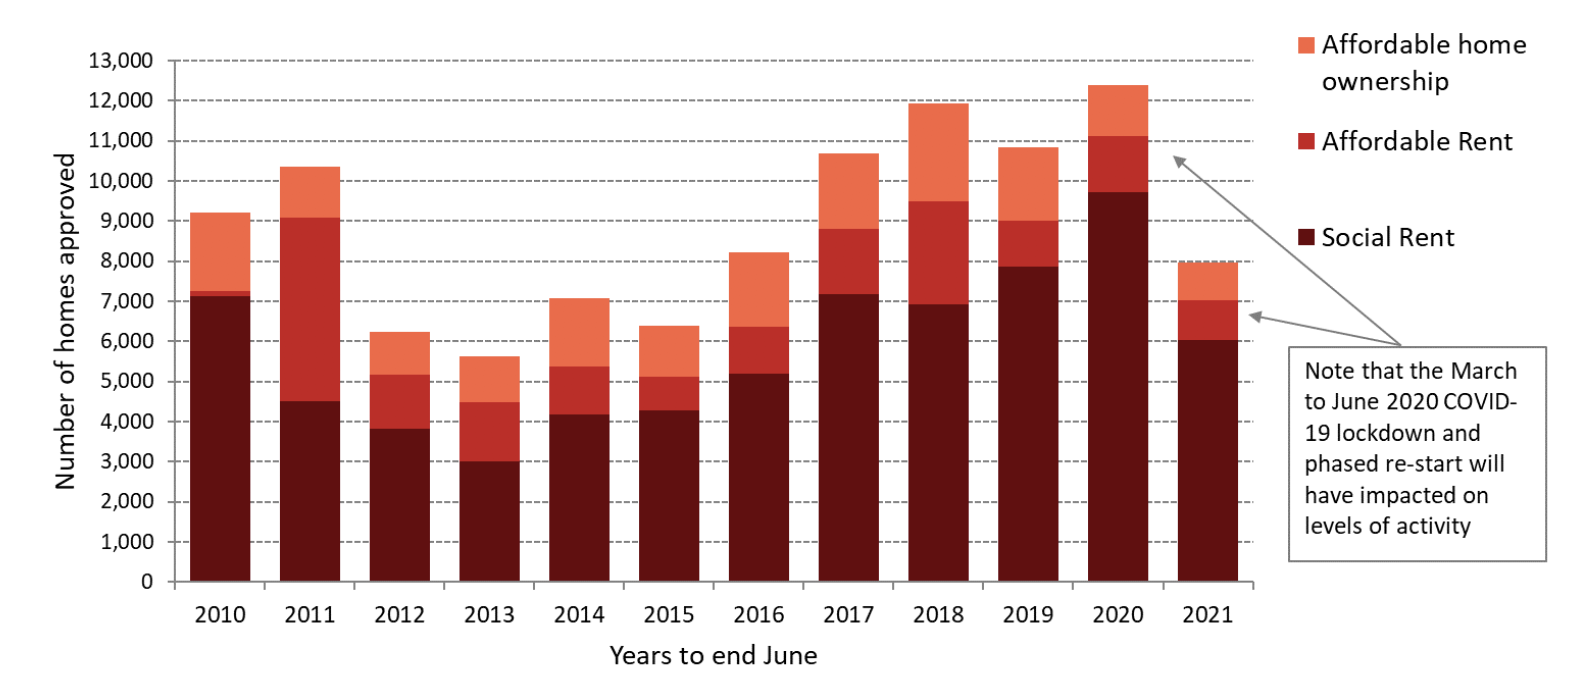 Type of AHSP approvals in the years to end June from 2010 to 2021